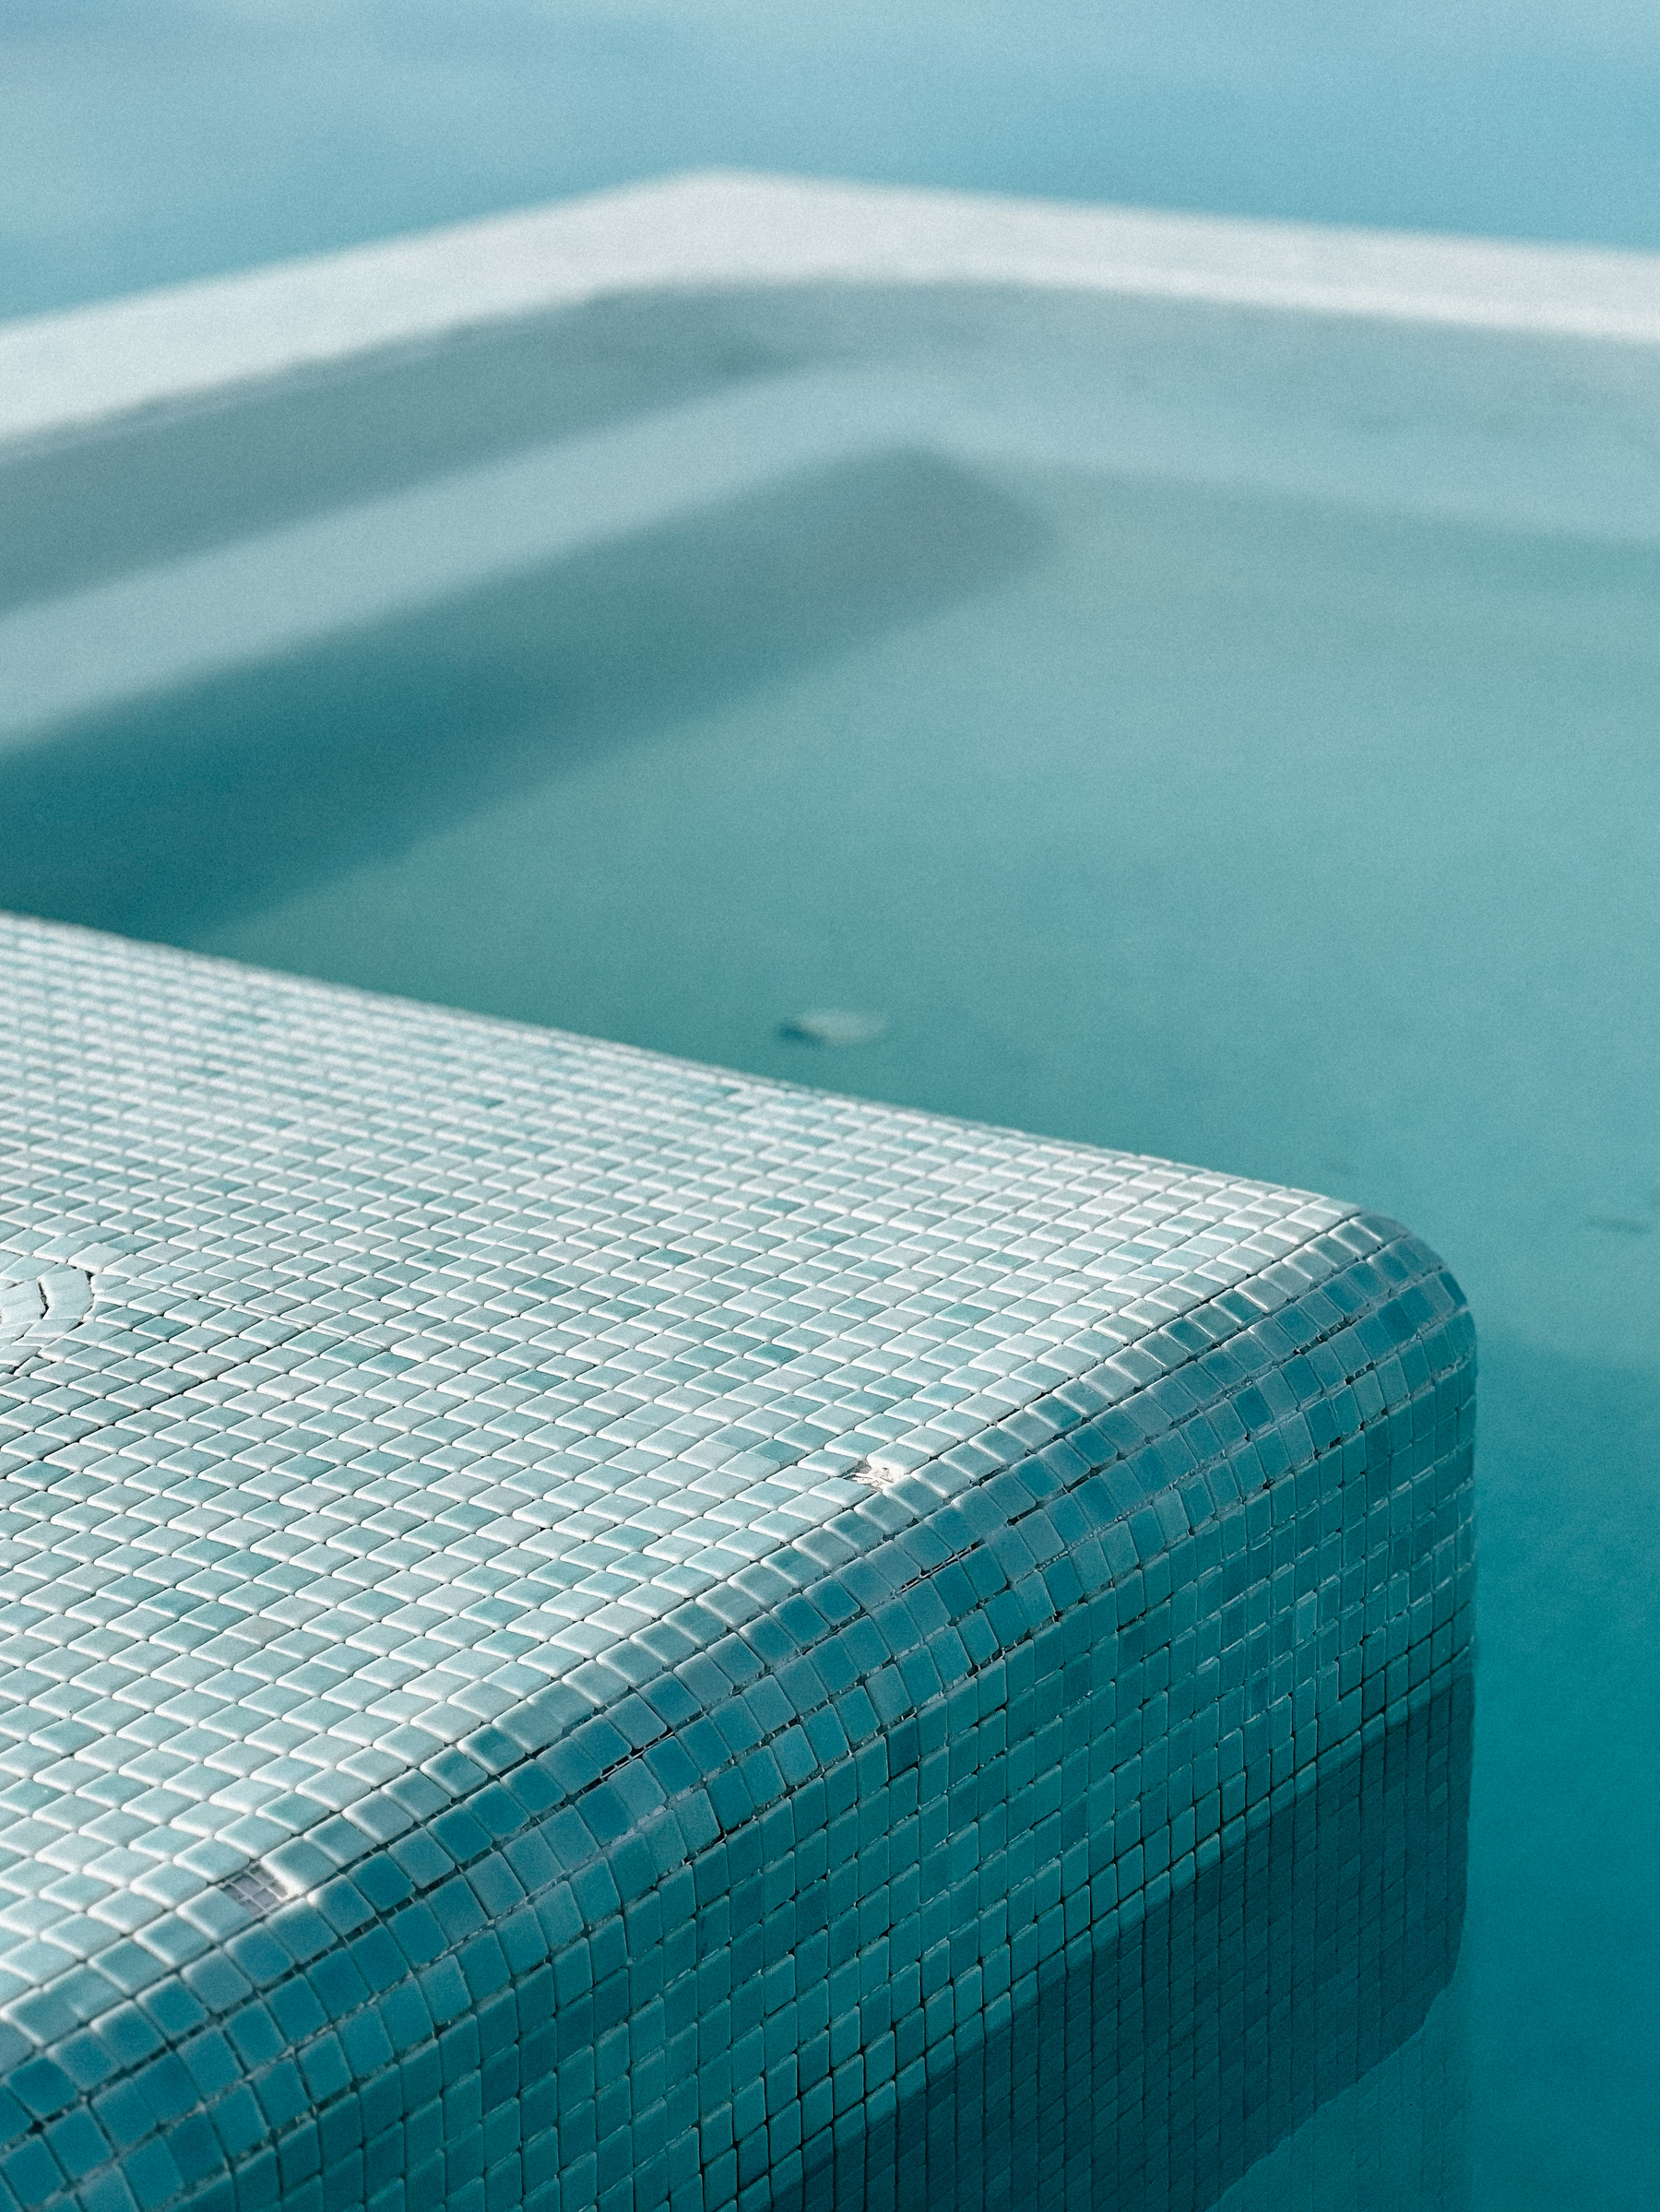 Edge of a swimming pool with clear blue water and a mosaic tile pool deck.